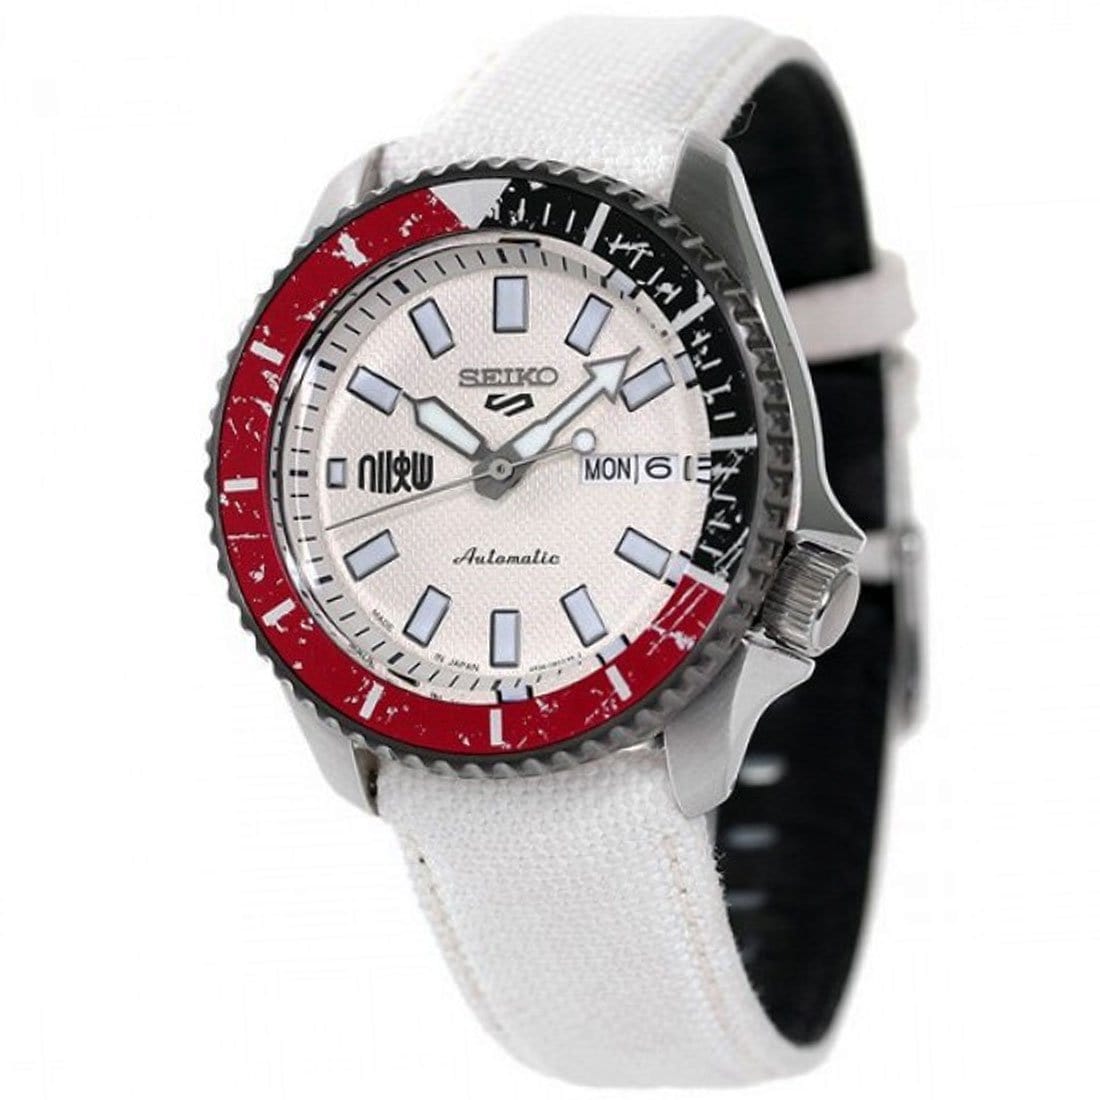 Top 65+ imagen seiko jdm limited edition - Abzlocal.mx